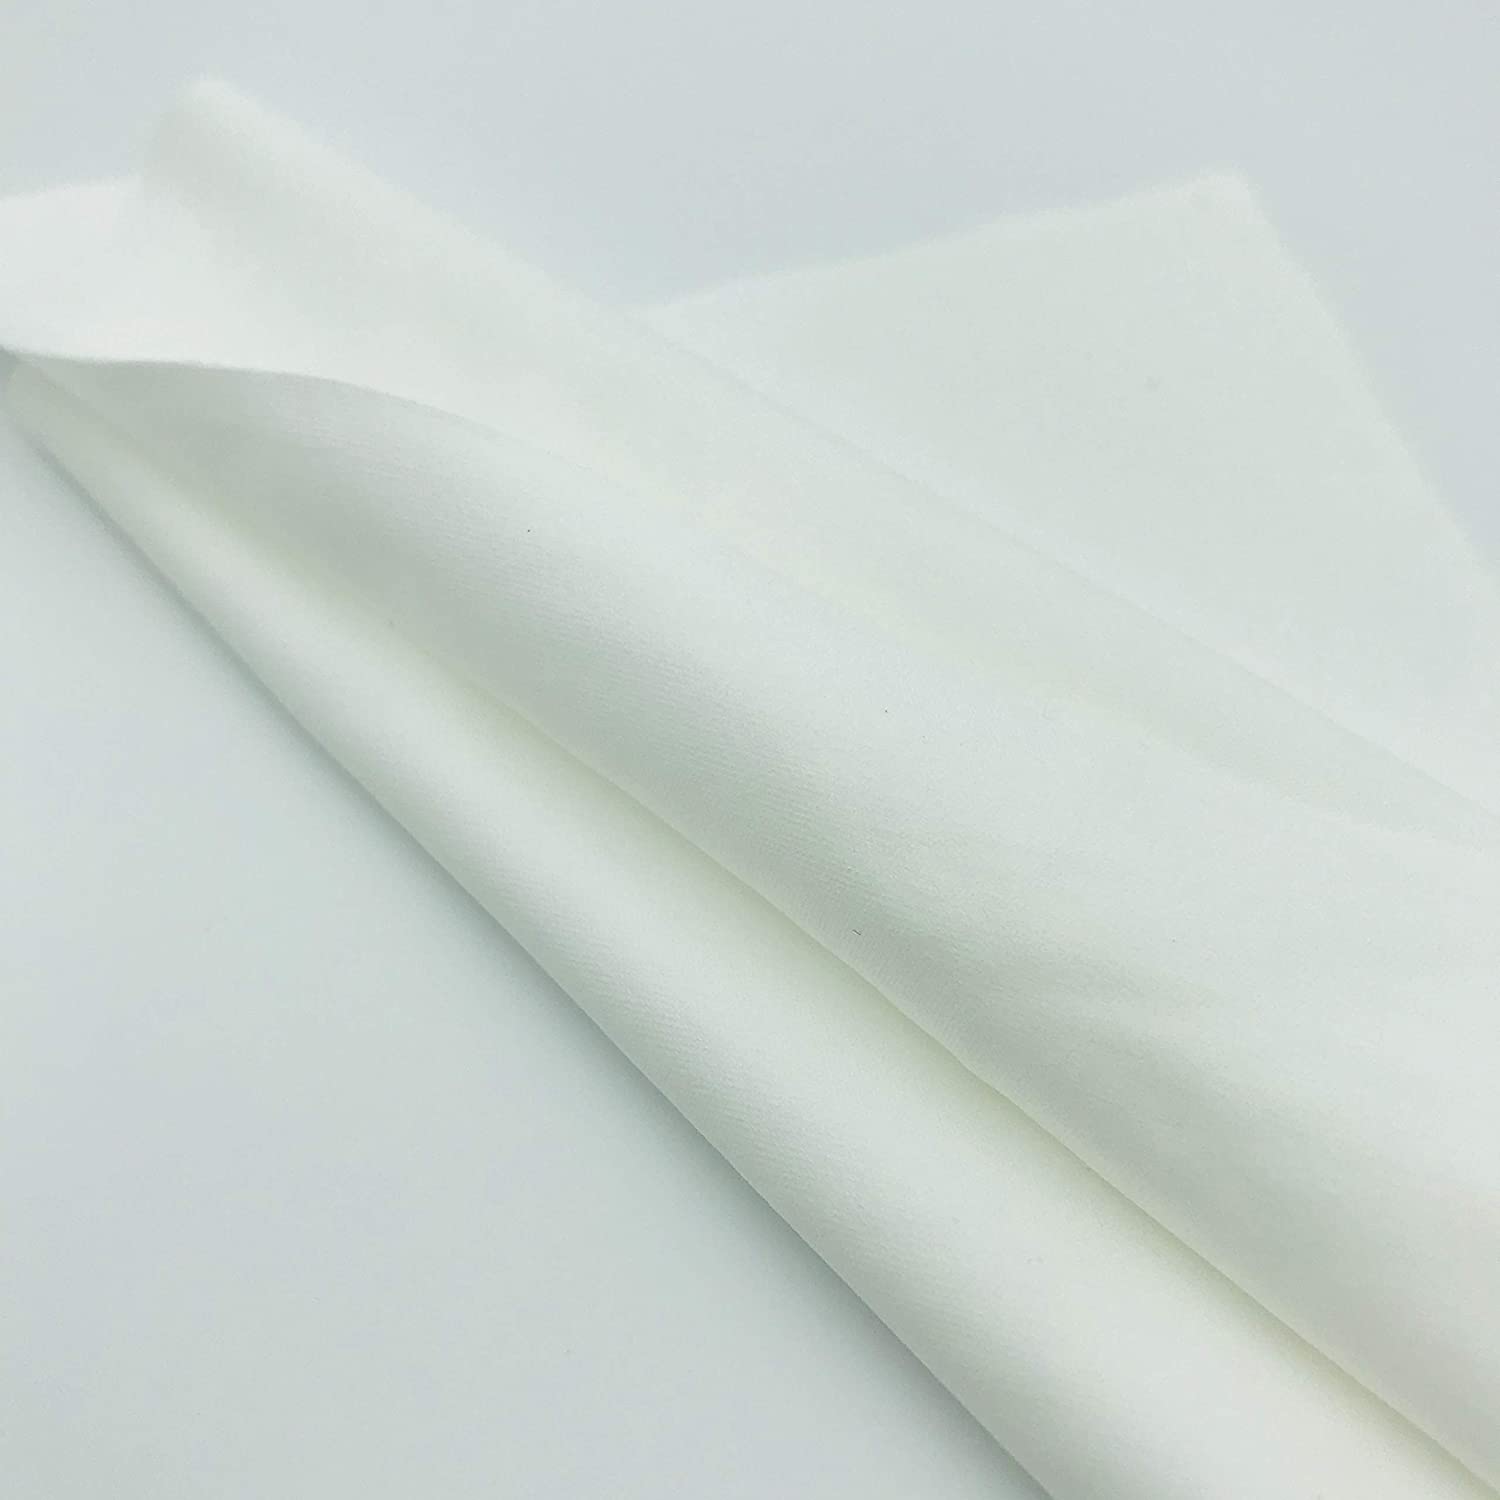 Cleanroom Double Knit 100% Polyester Wipers 9"x9" (Starting at 1 Box with 1,800 Wipes per 12 Bags) (No. CP14009)